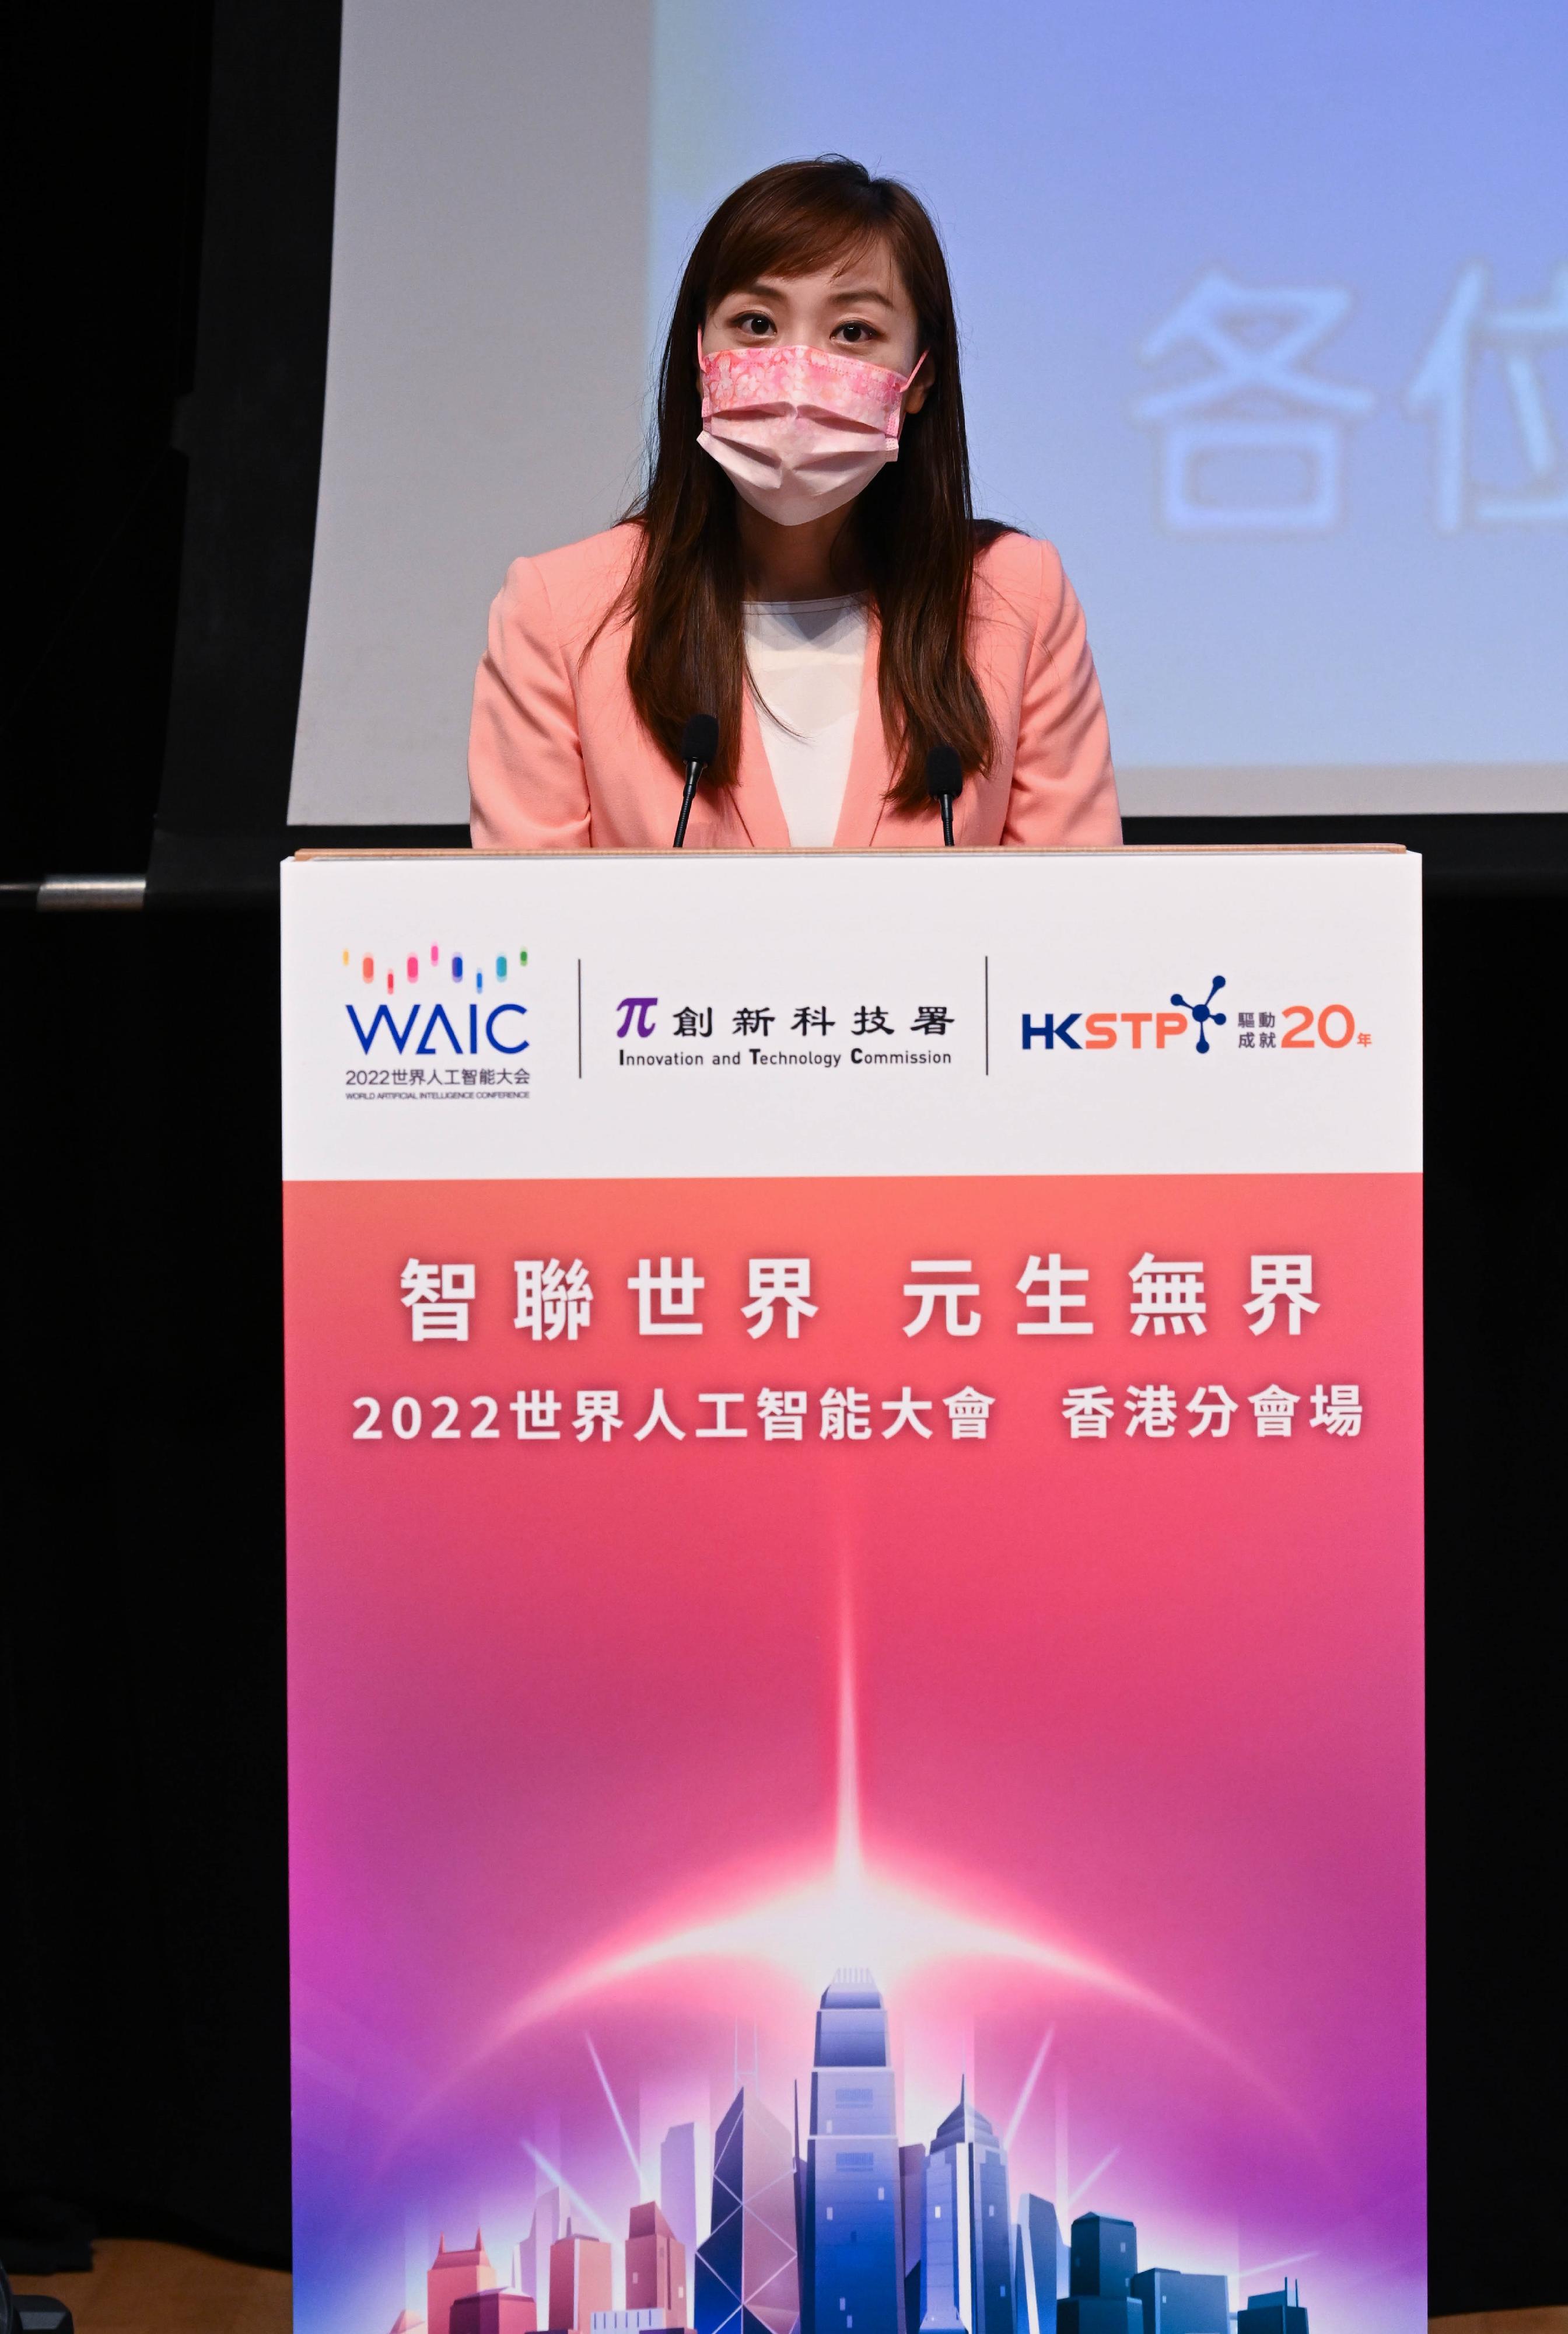 The Under Secretary for Innovation, Technology and Industry, Ms Lillian Cheong, delivers opening remarks on behalf of the Secretary for Innovation, Technology and Industry, Professor Sun Dong, at the World Artificial Intelligence Conference 2022 - Hong Kong Branch today (September 1).